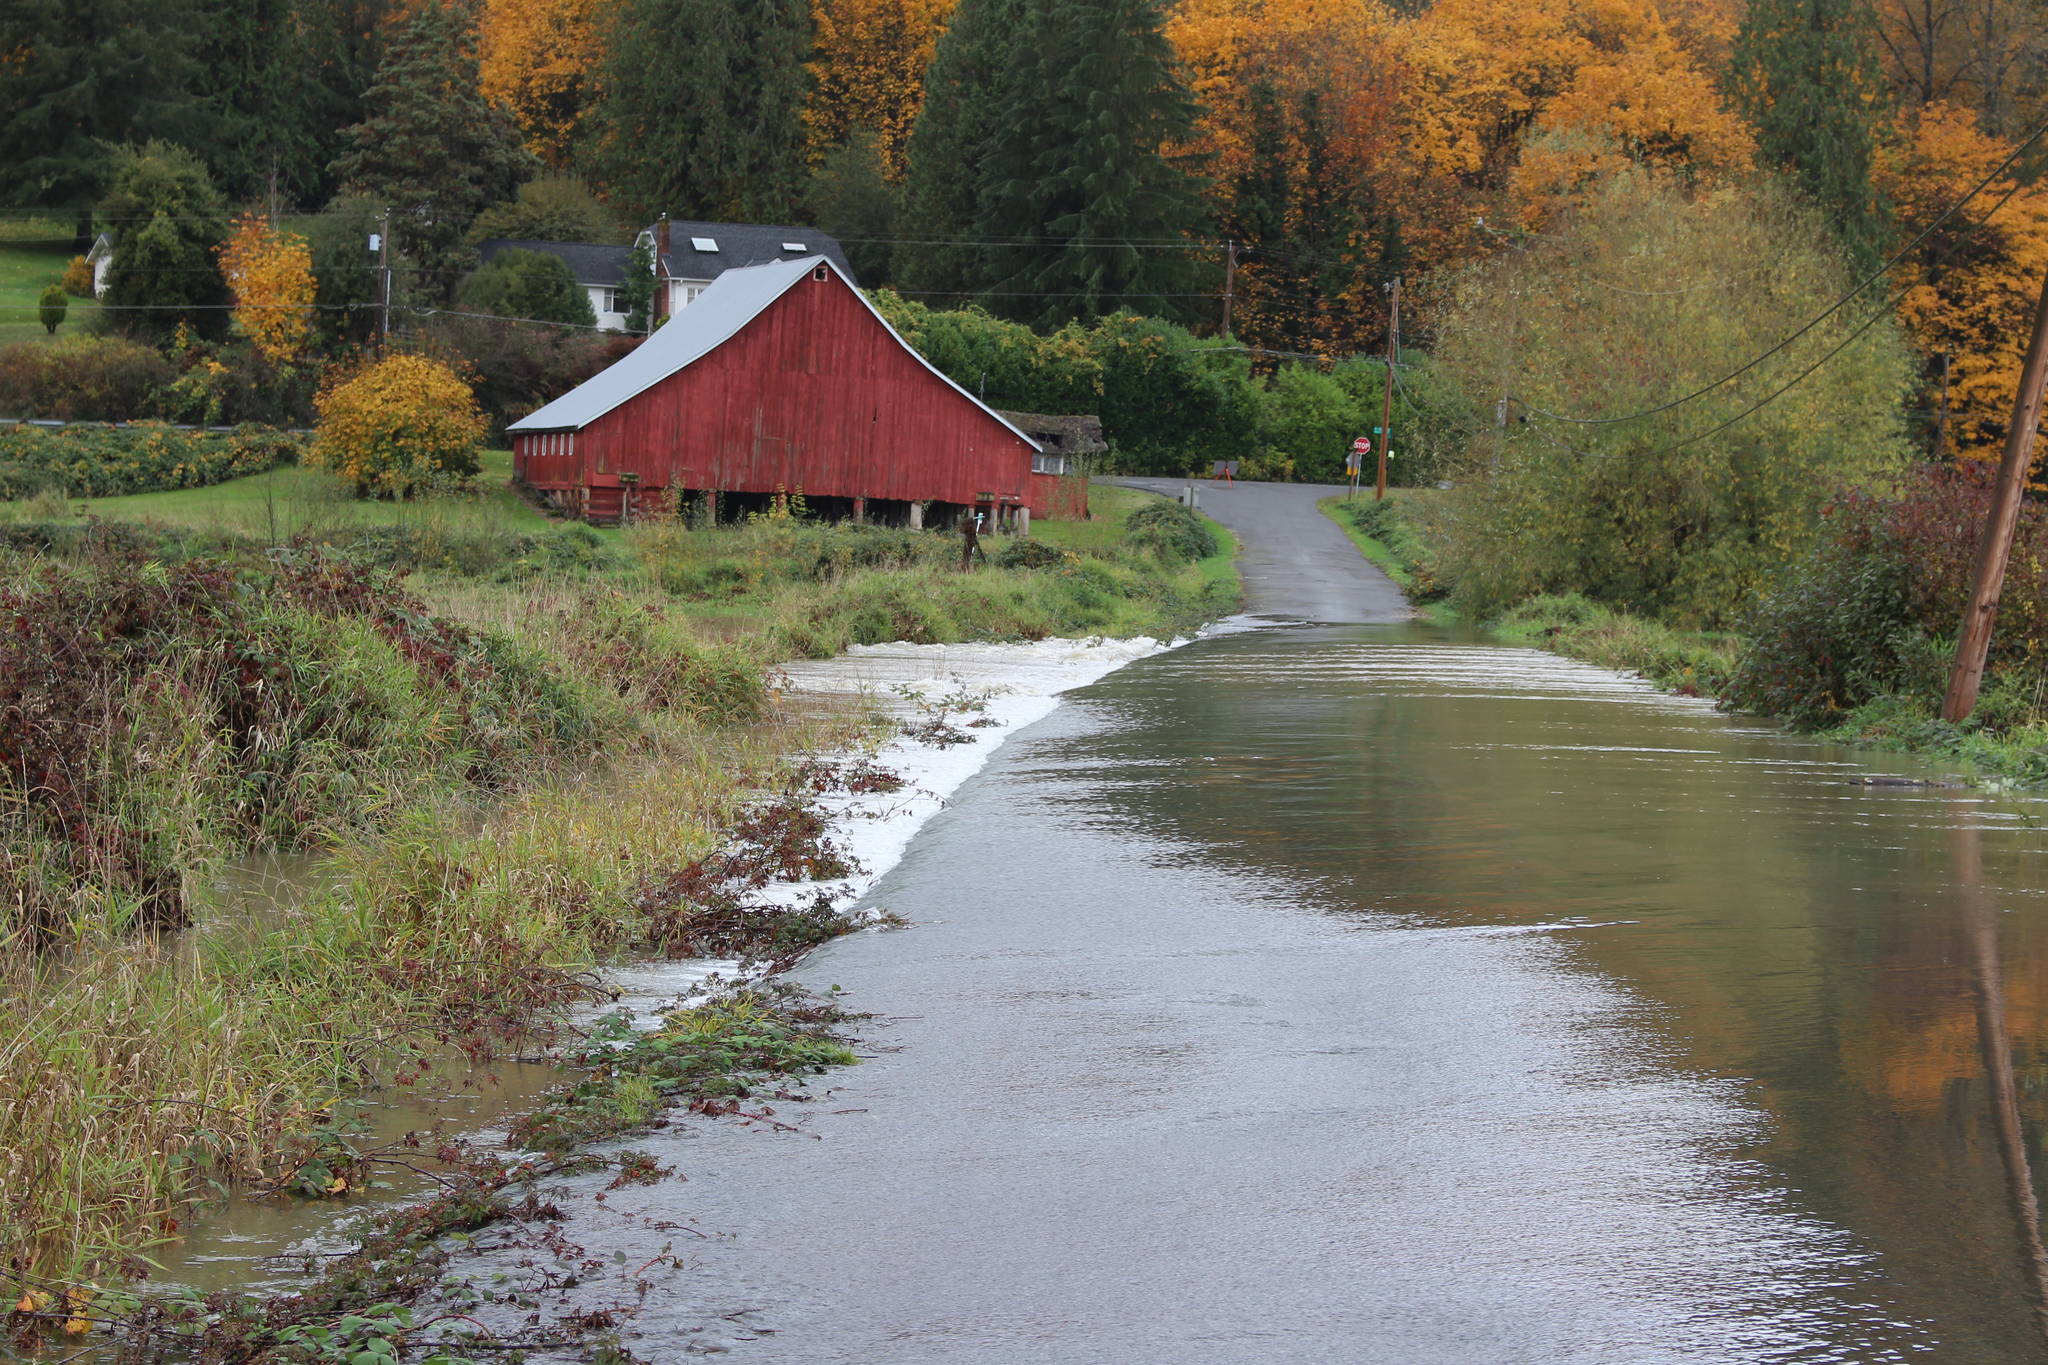 The Snoqualmie River had flooded low-lying areas around SE 100th Street on Oct. 22, 2019. Water can be seen flowing across the closed road here. Aaron Kunkler/staff photo